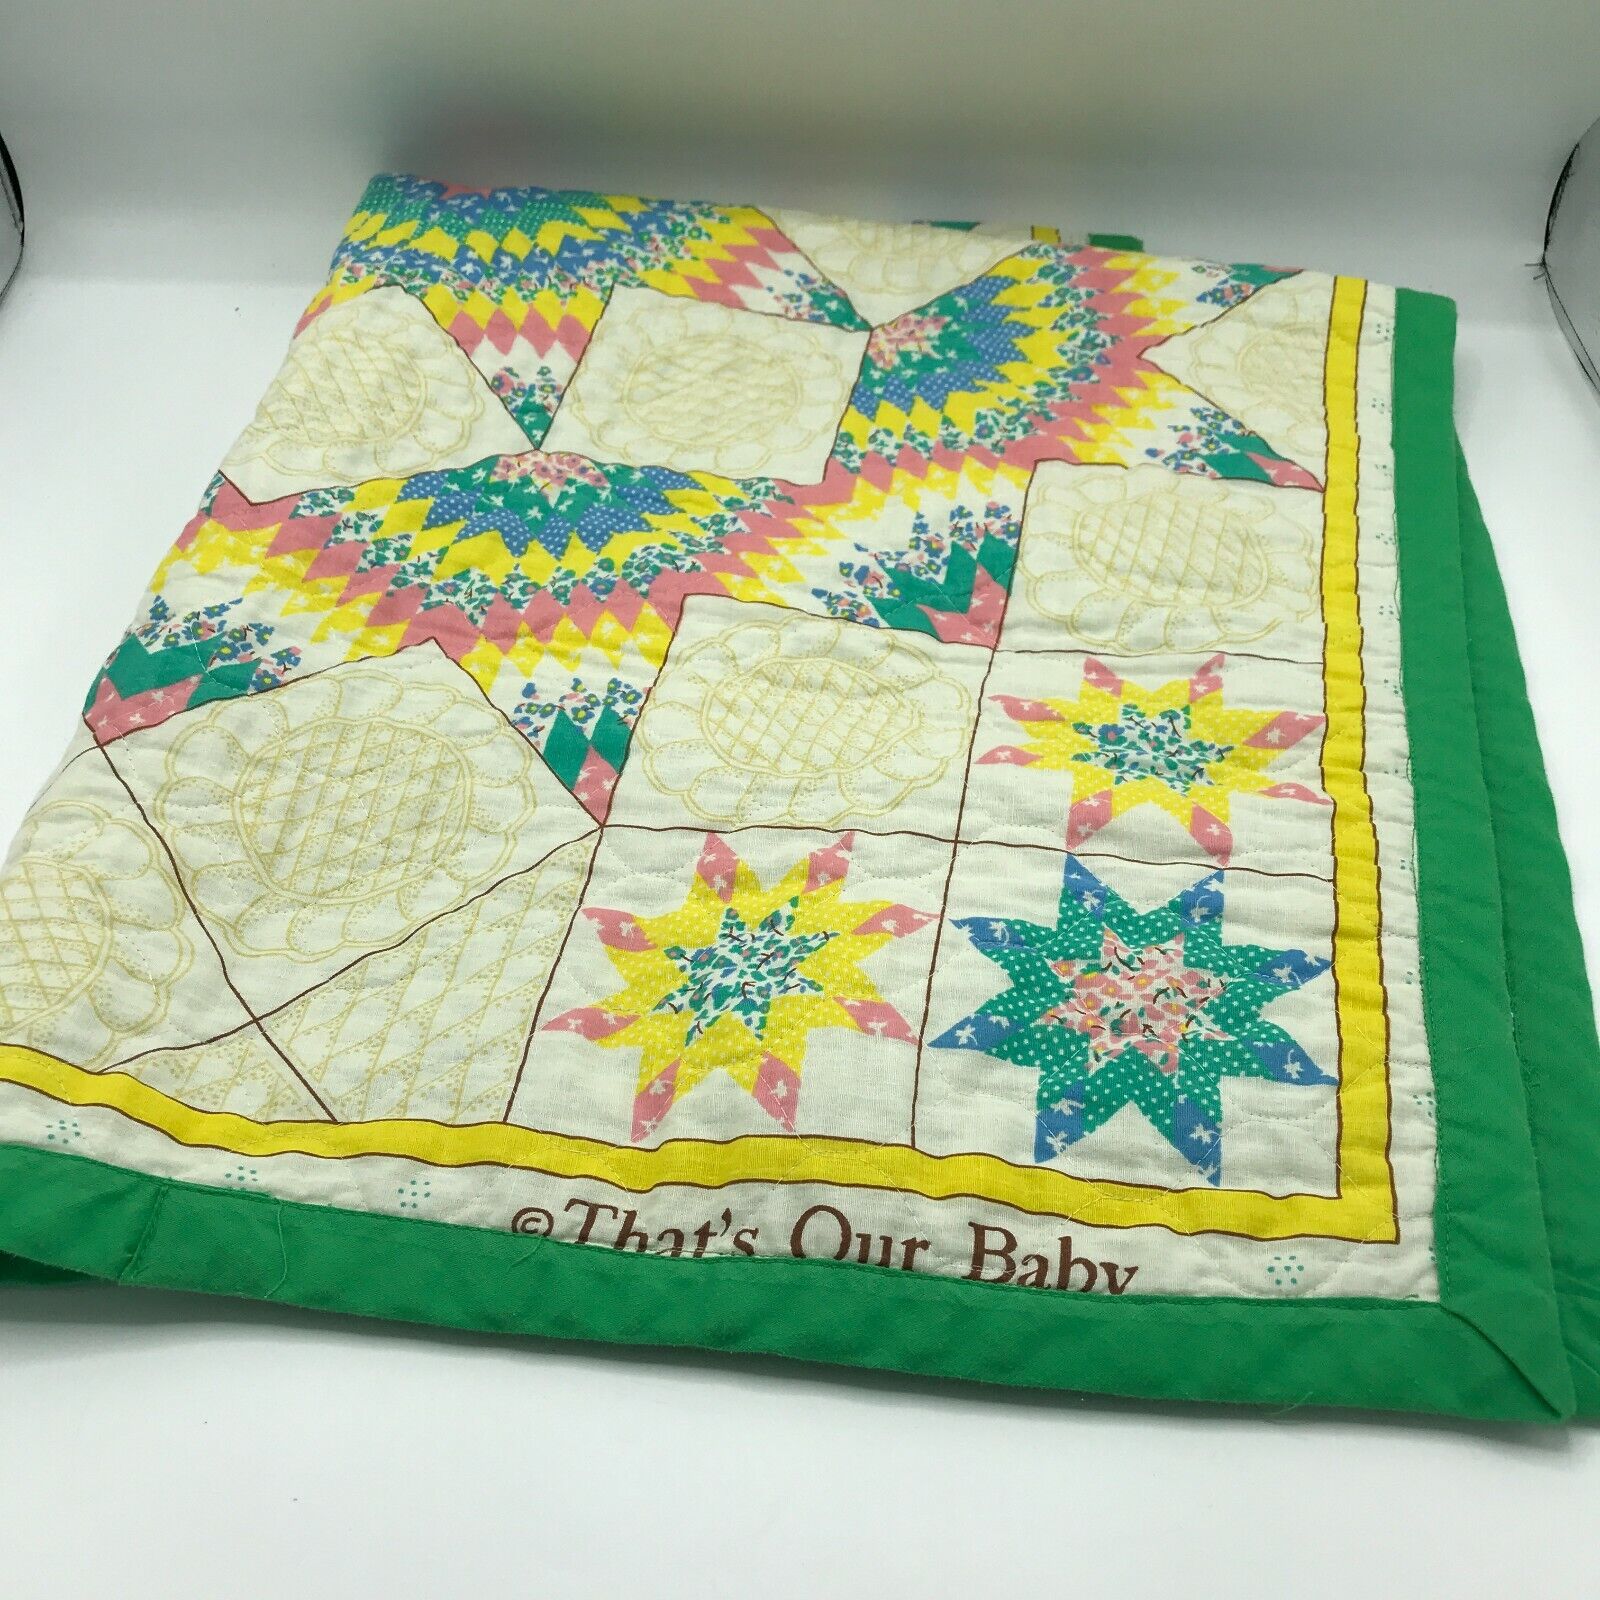 Vintage That's Our Baby Baby Blanket Quilted Blanket Triangles Squares Circles P